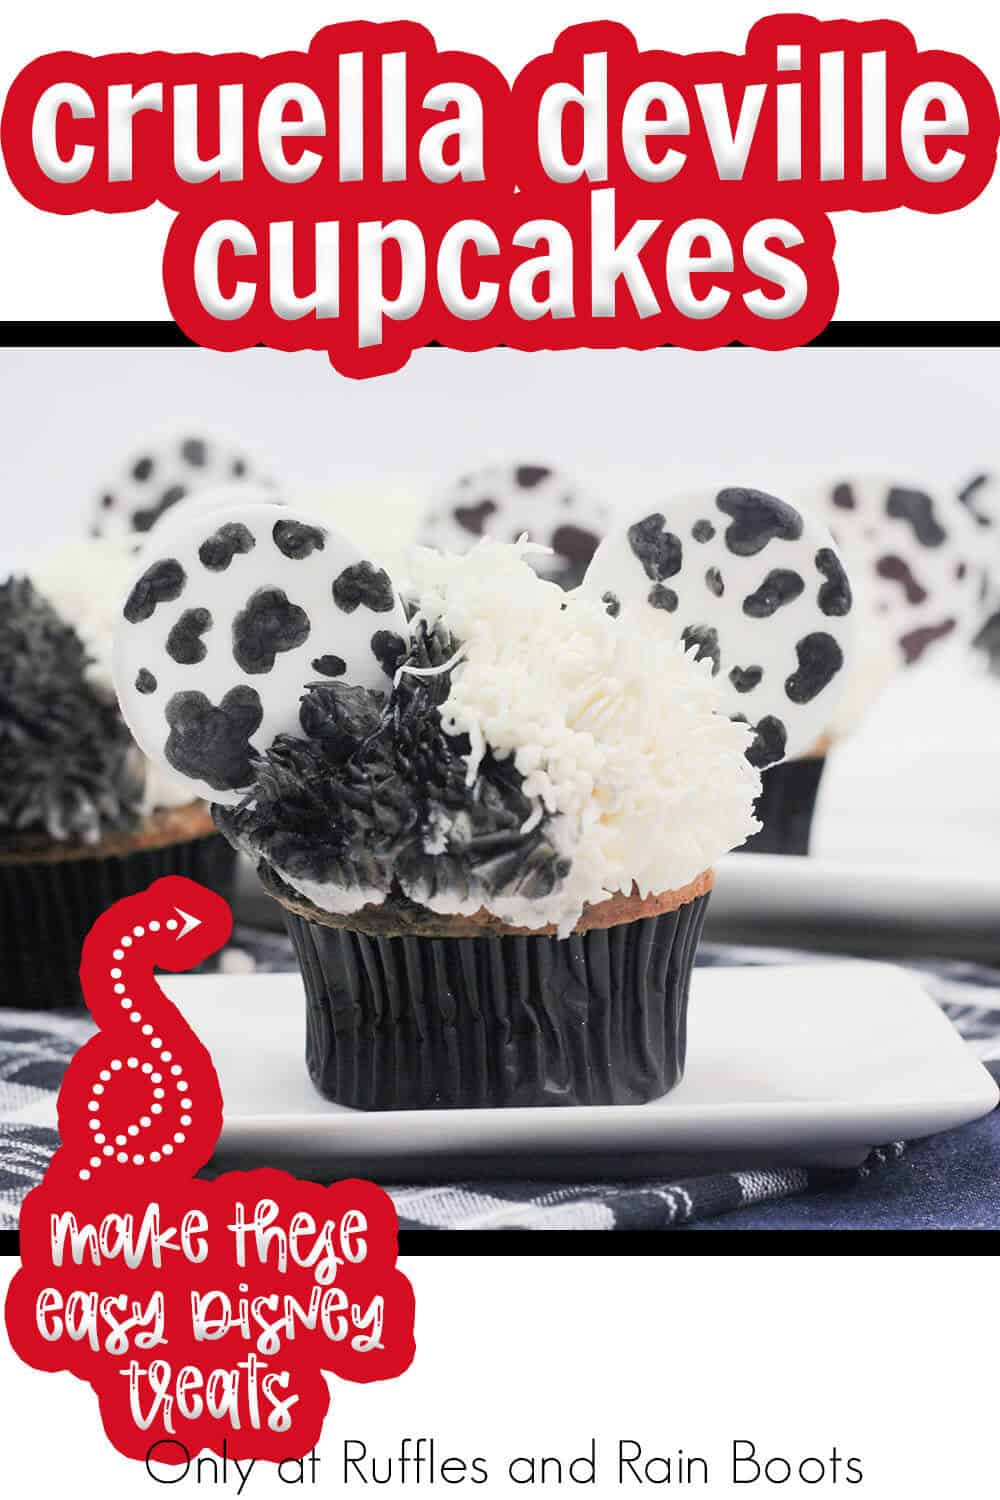 cruella and dalmations party cupcakes with text which reads cruella deville cupcakes make these easy disney treats